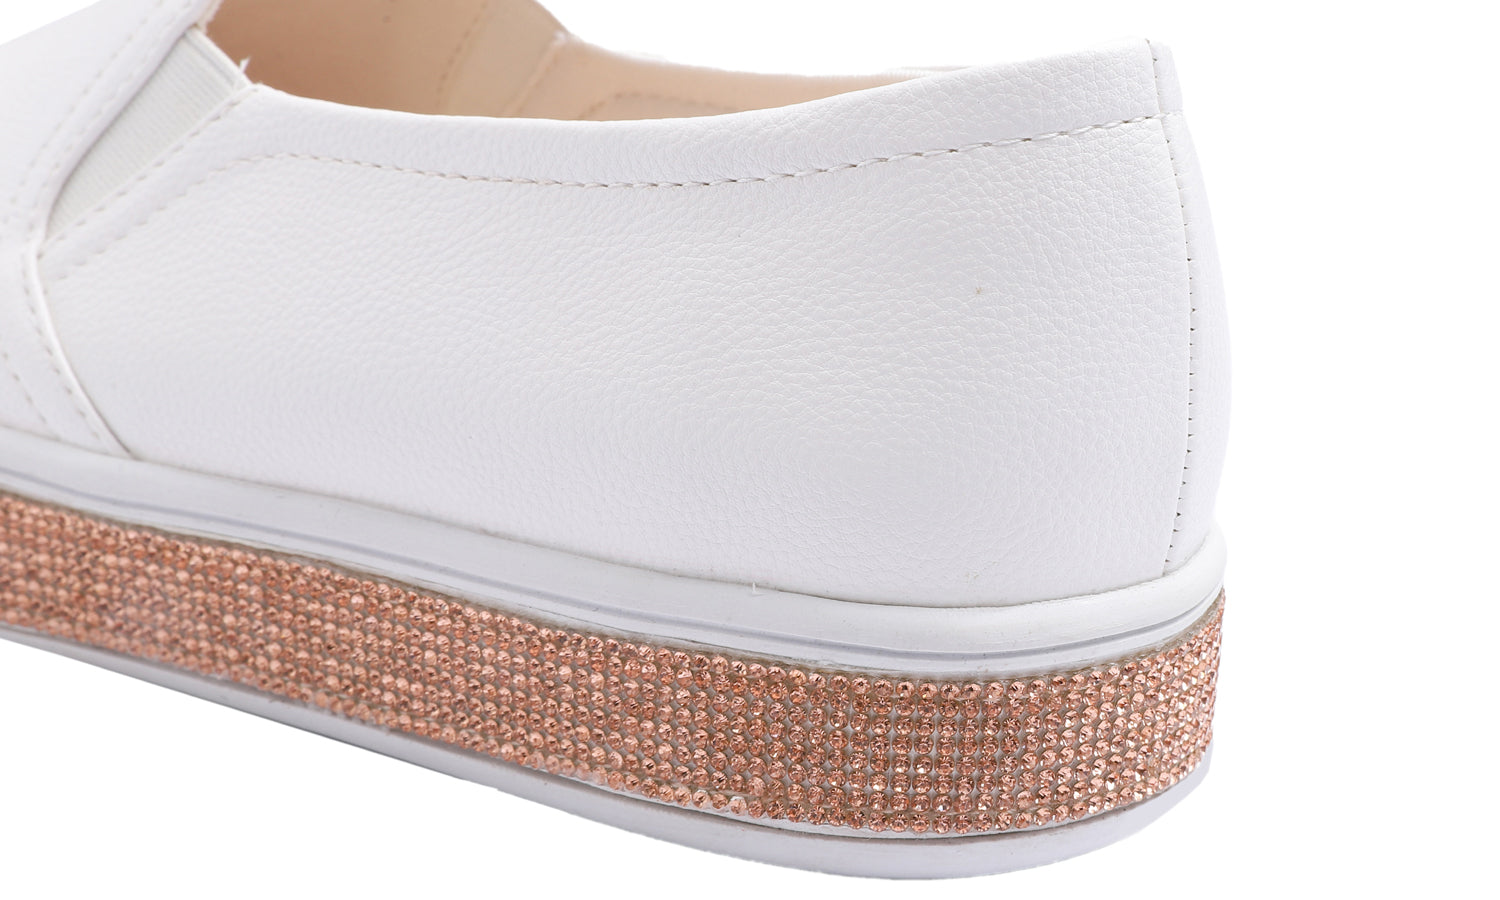 Feversole Women's Fashion Slip-On Sneaker Casual Platform Loafers White Rose Gold Rhinestone Shoes